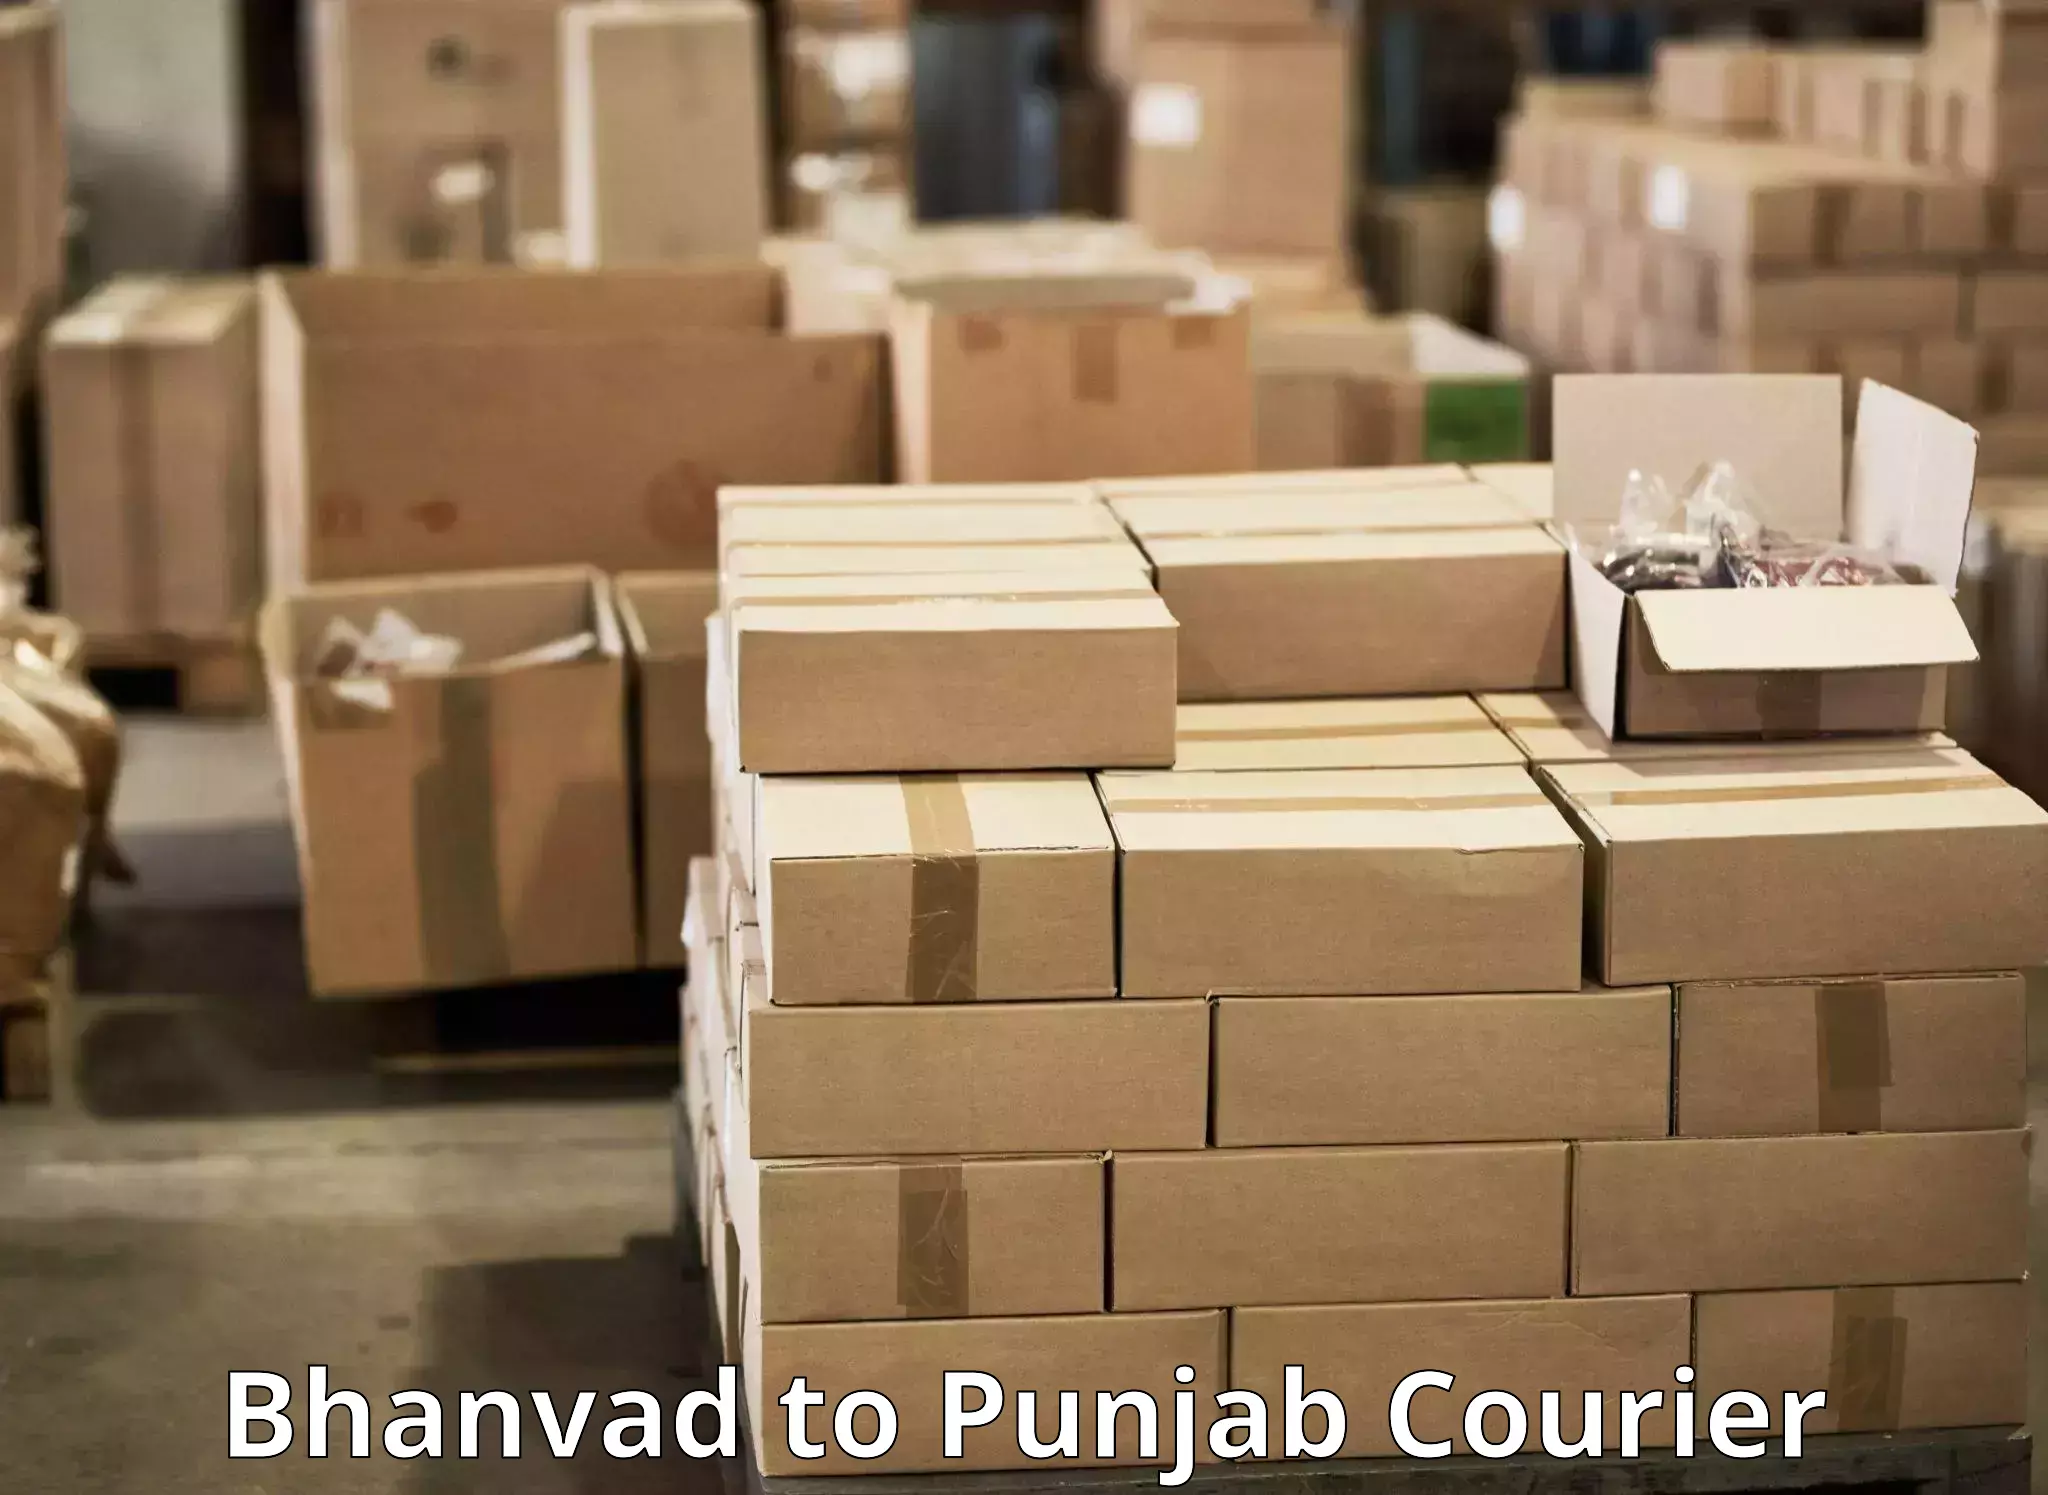 Reliable courier service in Bhanvad to Jalandhar